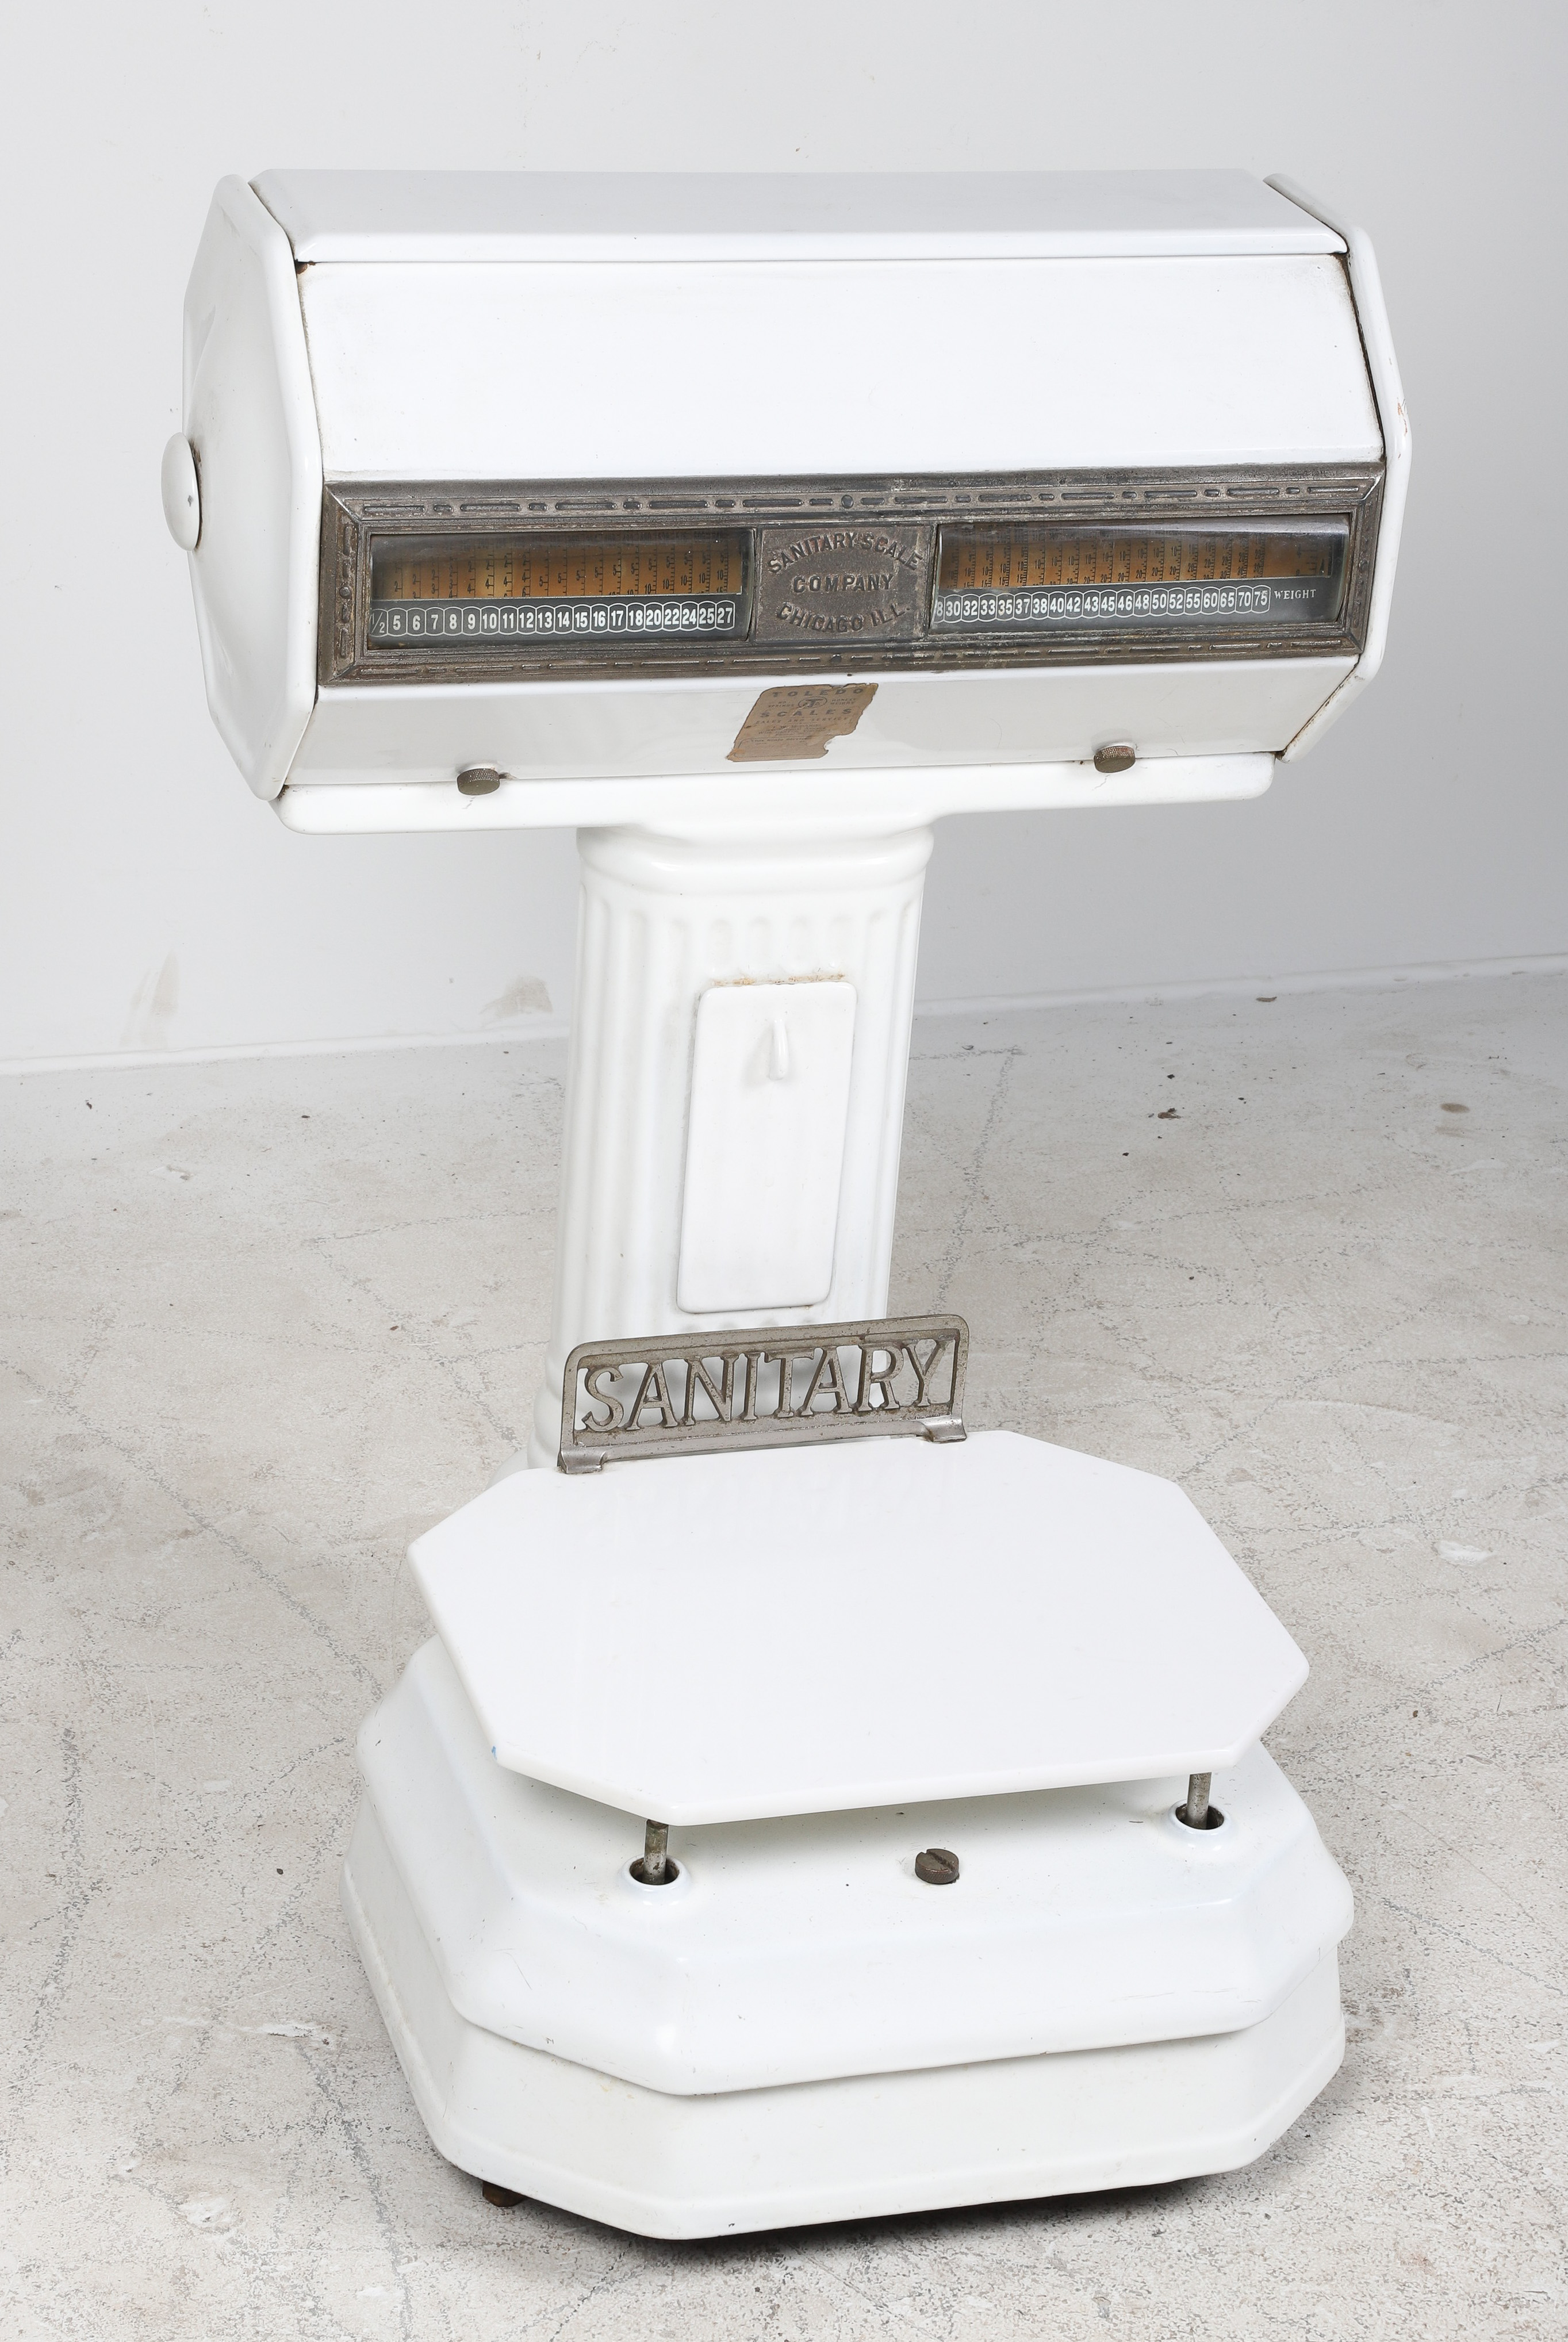 Sanitary Scale Co meat scale, Chicago,